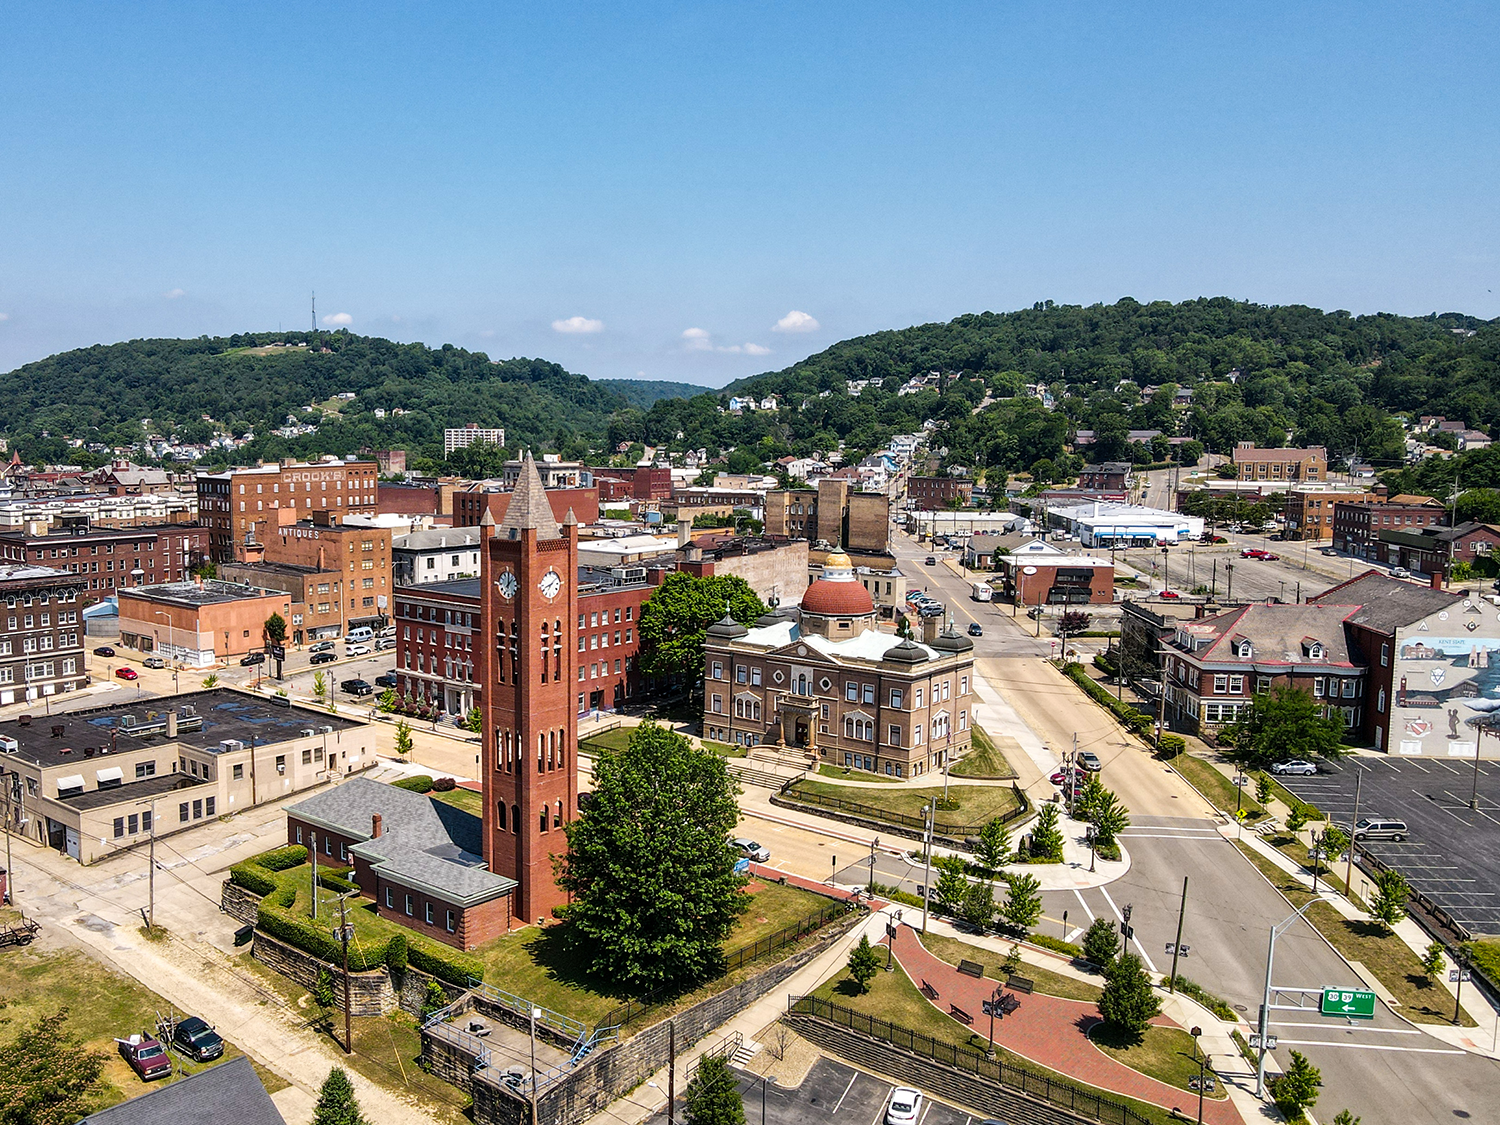 An overhead drone view of downtown East Liverpool featuring a number of recognizable buildings